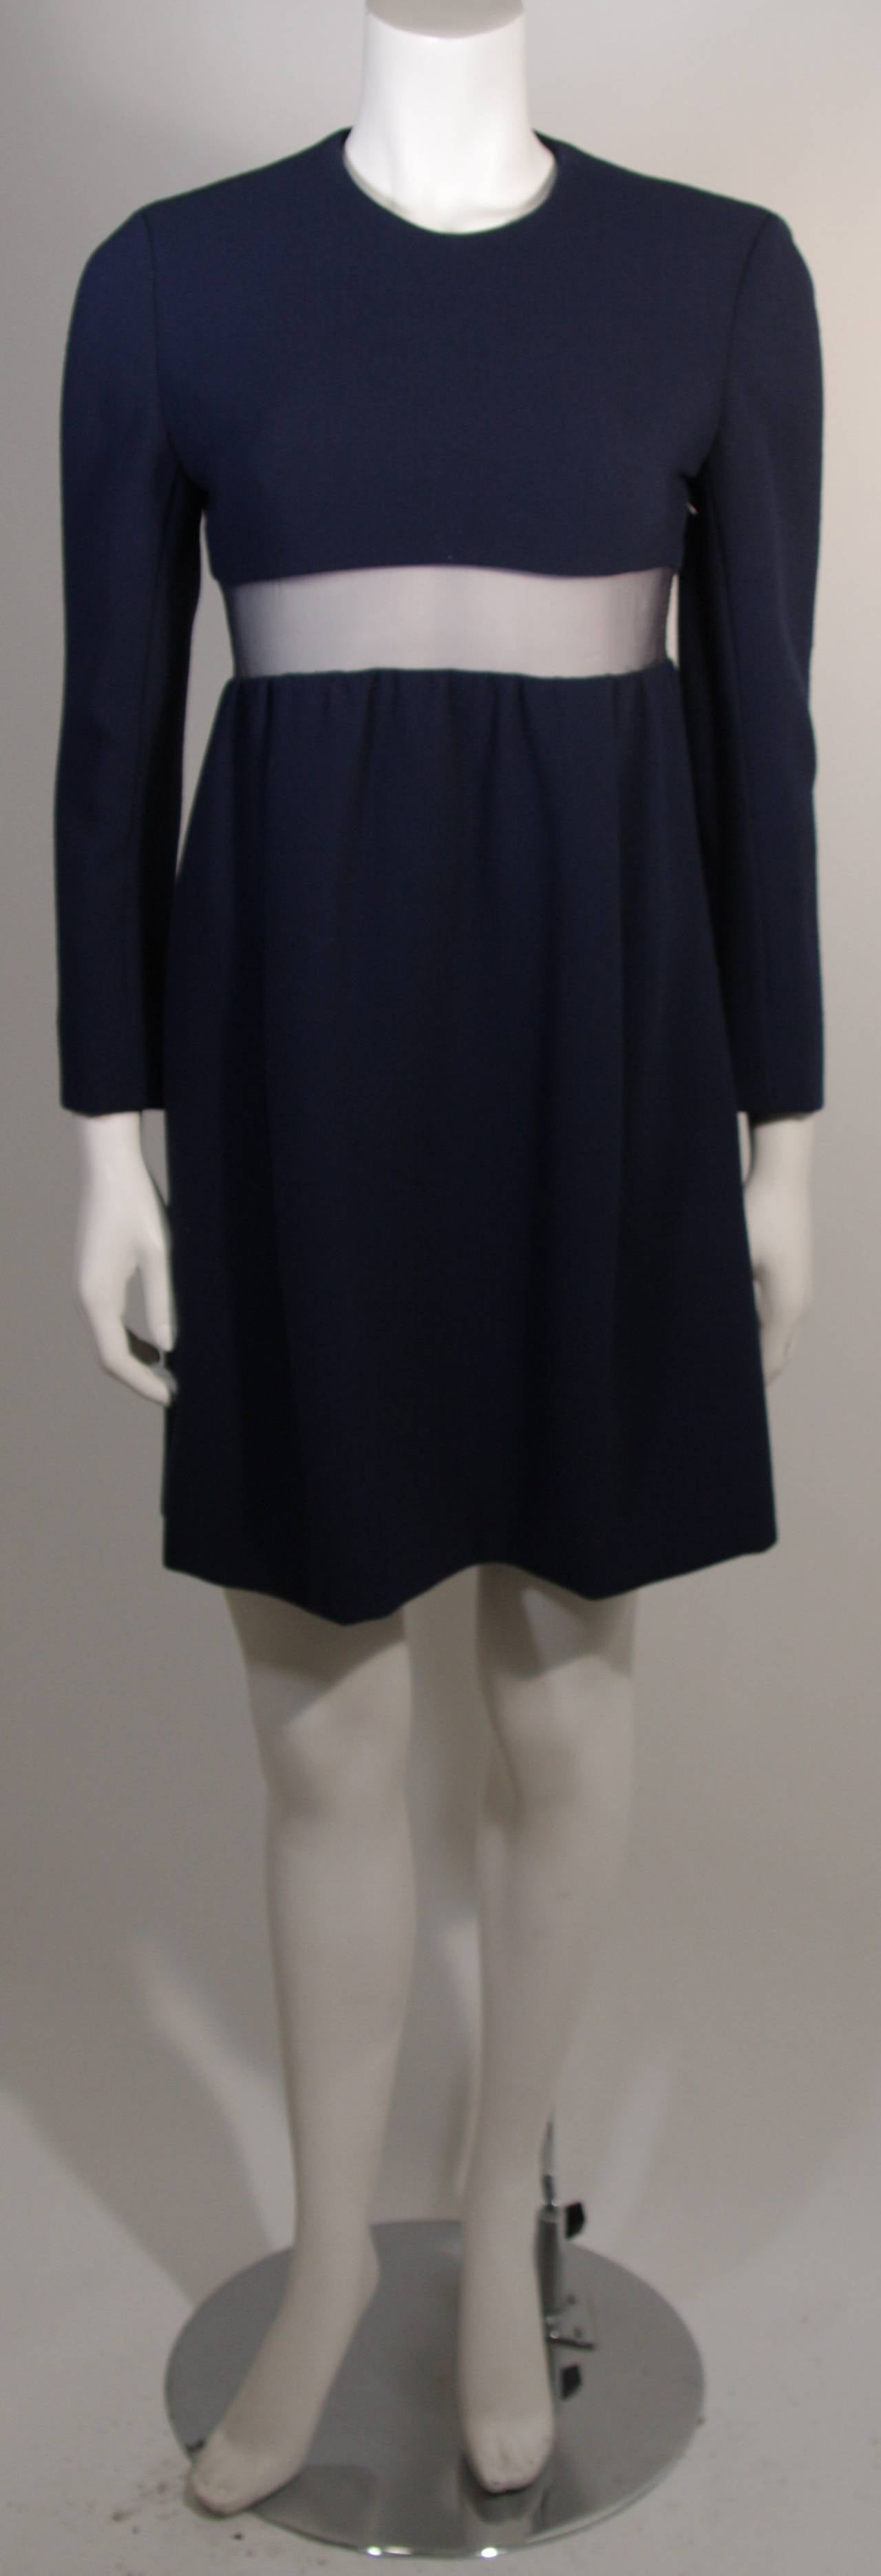 This Galanos dress is composed of a blue wool with long sleeves and features a mesh waist detail. There is a side zipper for ease of access and side pockets. A delightful design. 

Measures (Approximately)
Length: 35.5